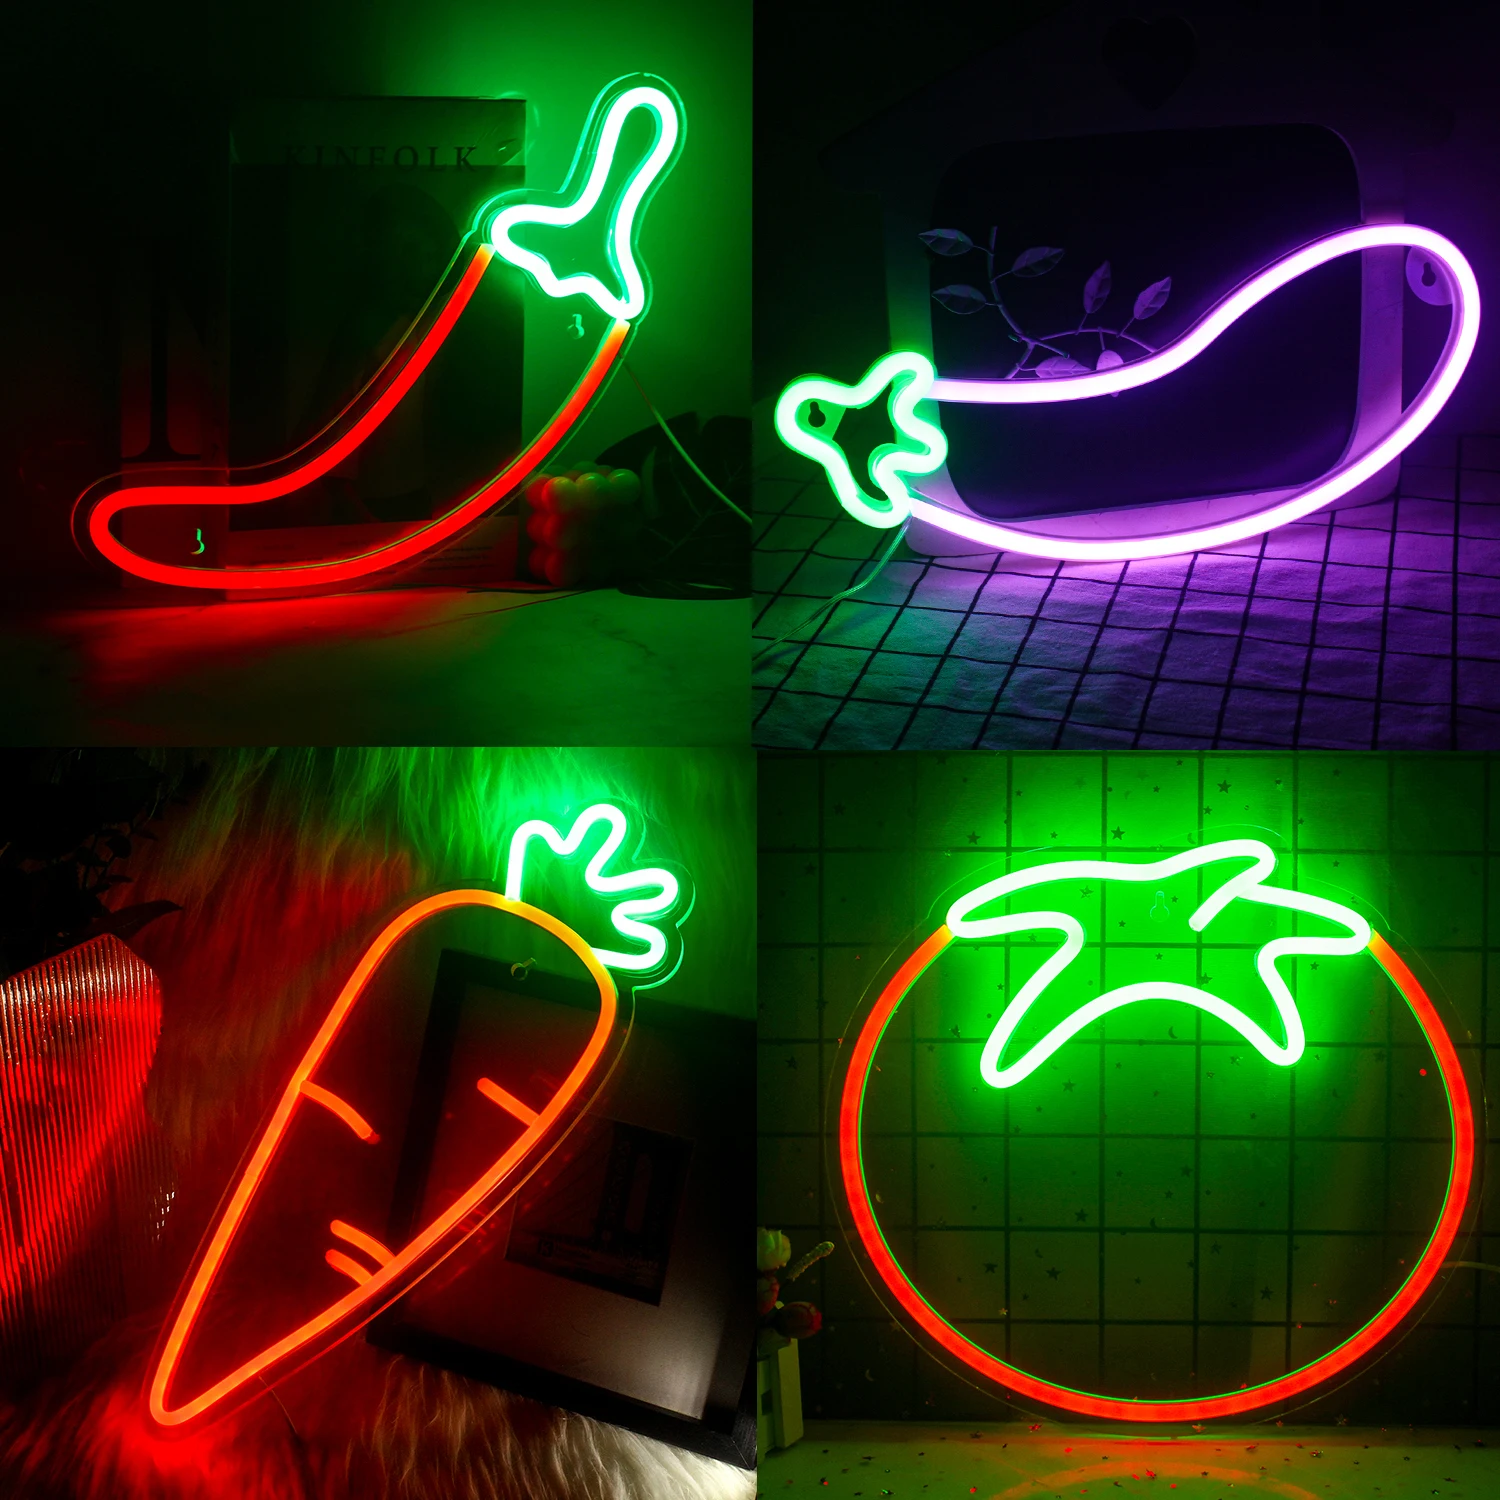 Neon Sign LED Light Chili Tomato Eggplant Carrot Acrylic Wall Bar Party Office Room Bedroom Kitchen Beautiful Decorate